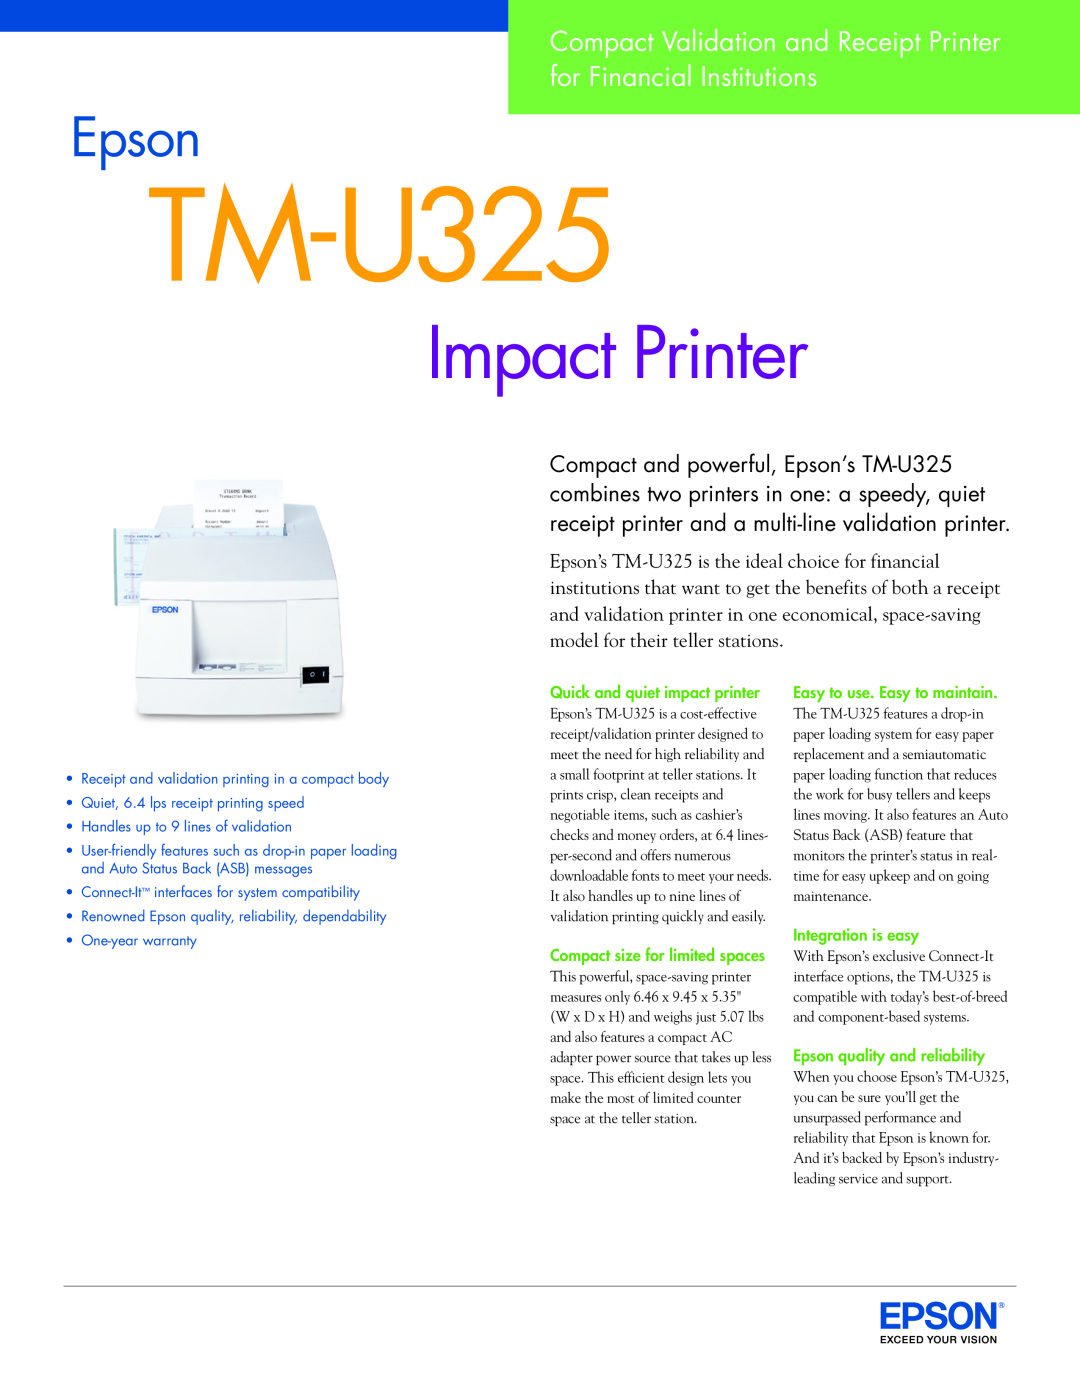 Epson warranty Compact Validation and Receipt Printer for Financial Institutions, TM-U325, Impact Printer, Epson 